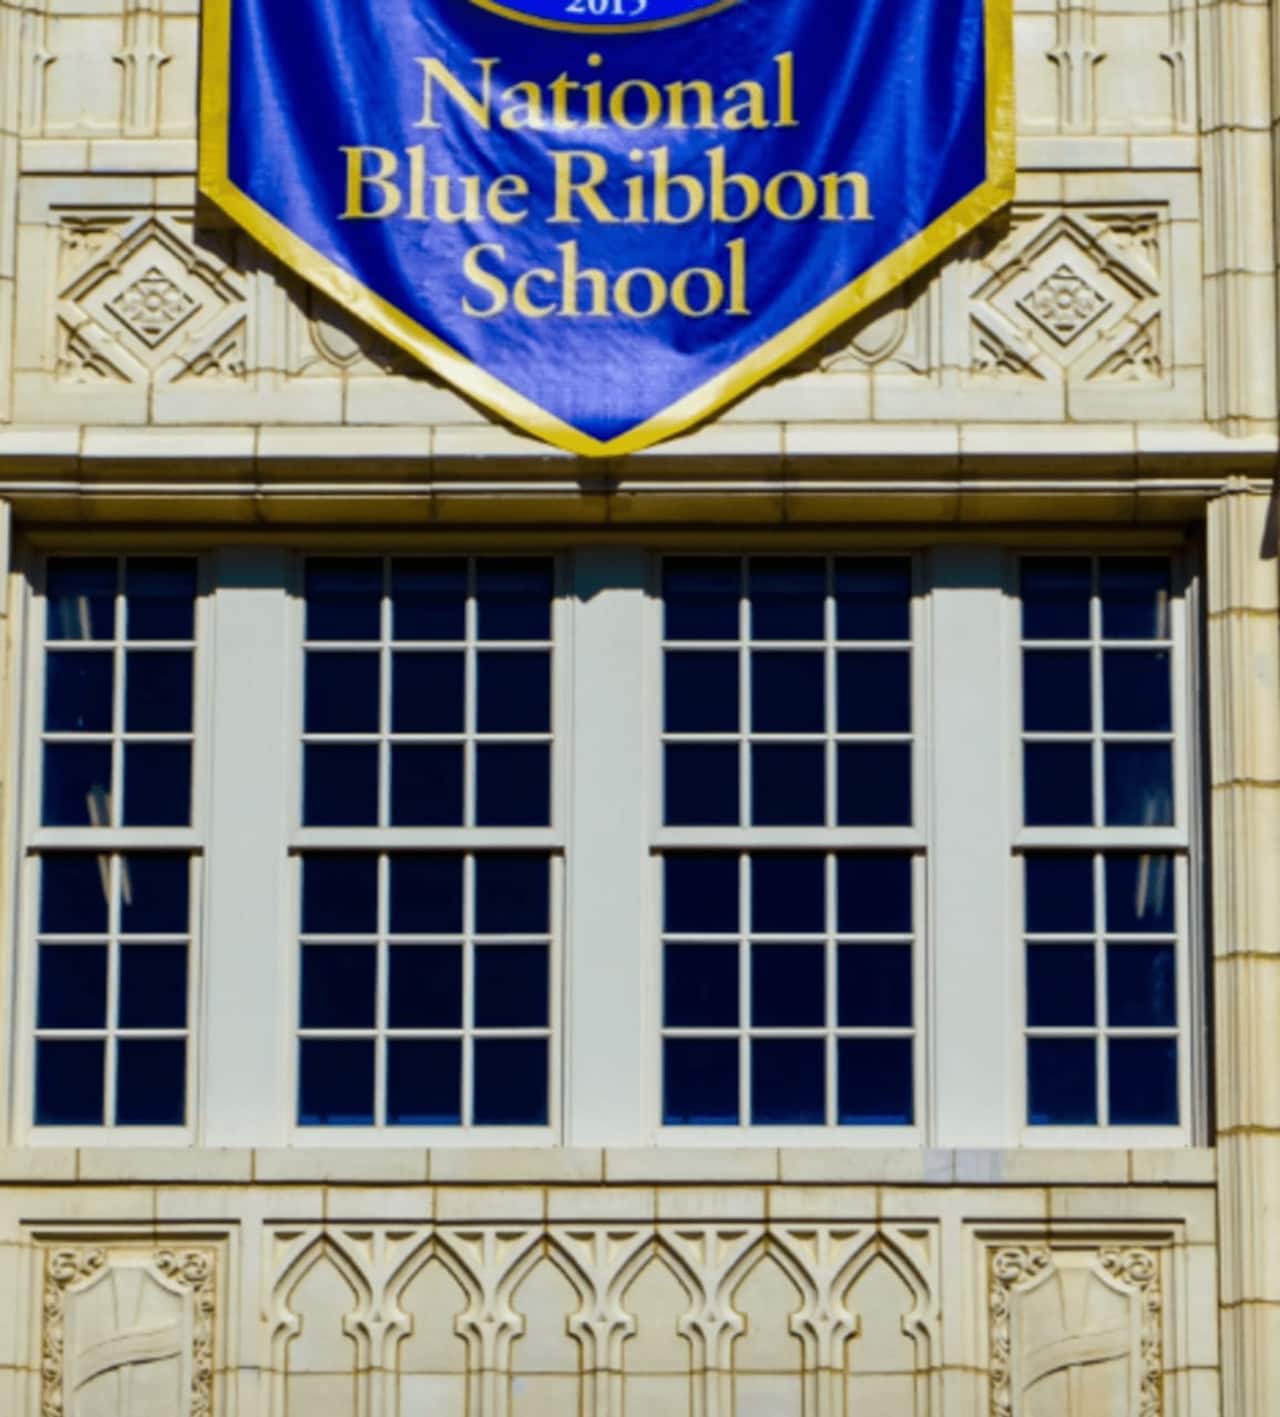 Some Long Island schools have been designated as National Blue Ribbon Schools.